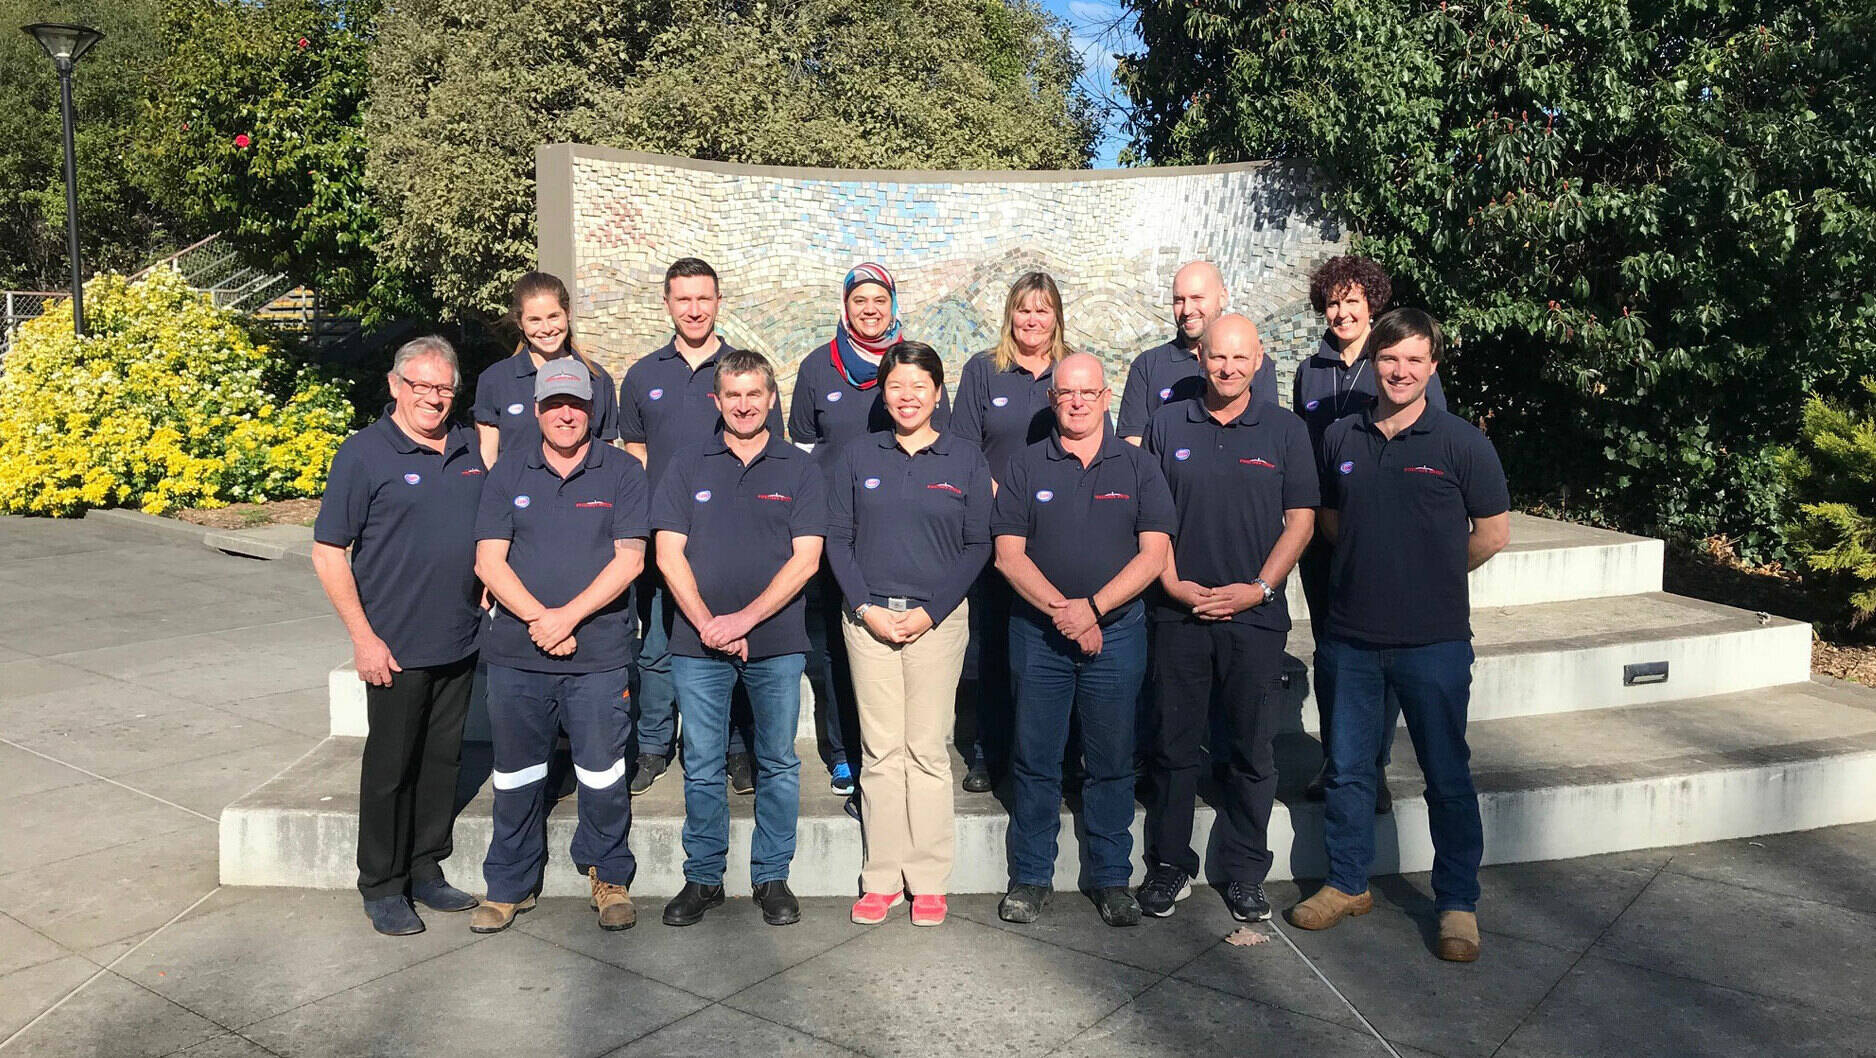 Image Photo  The pipelines team pictured in 2018.